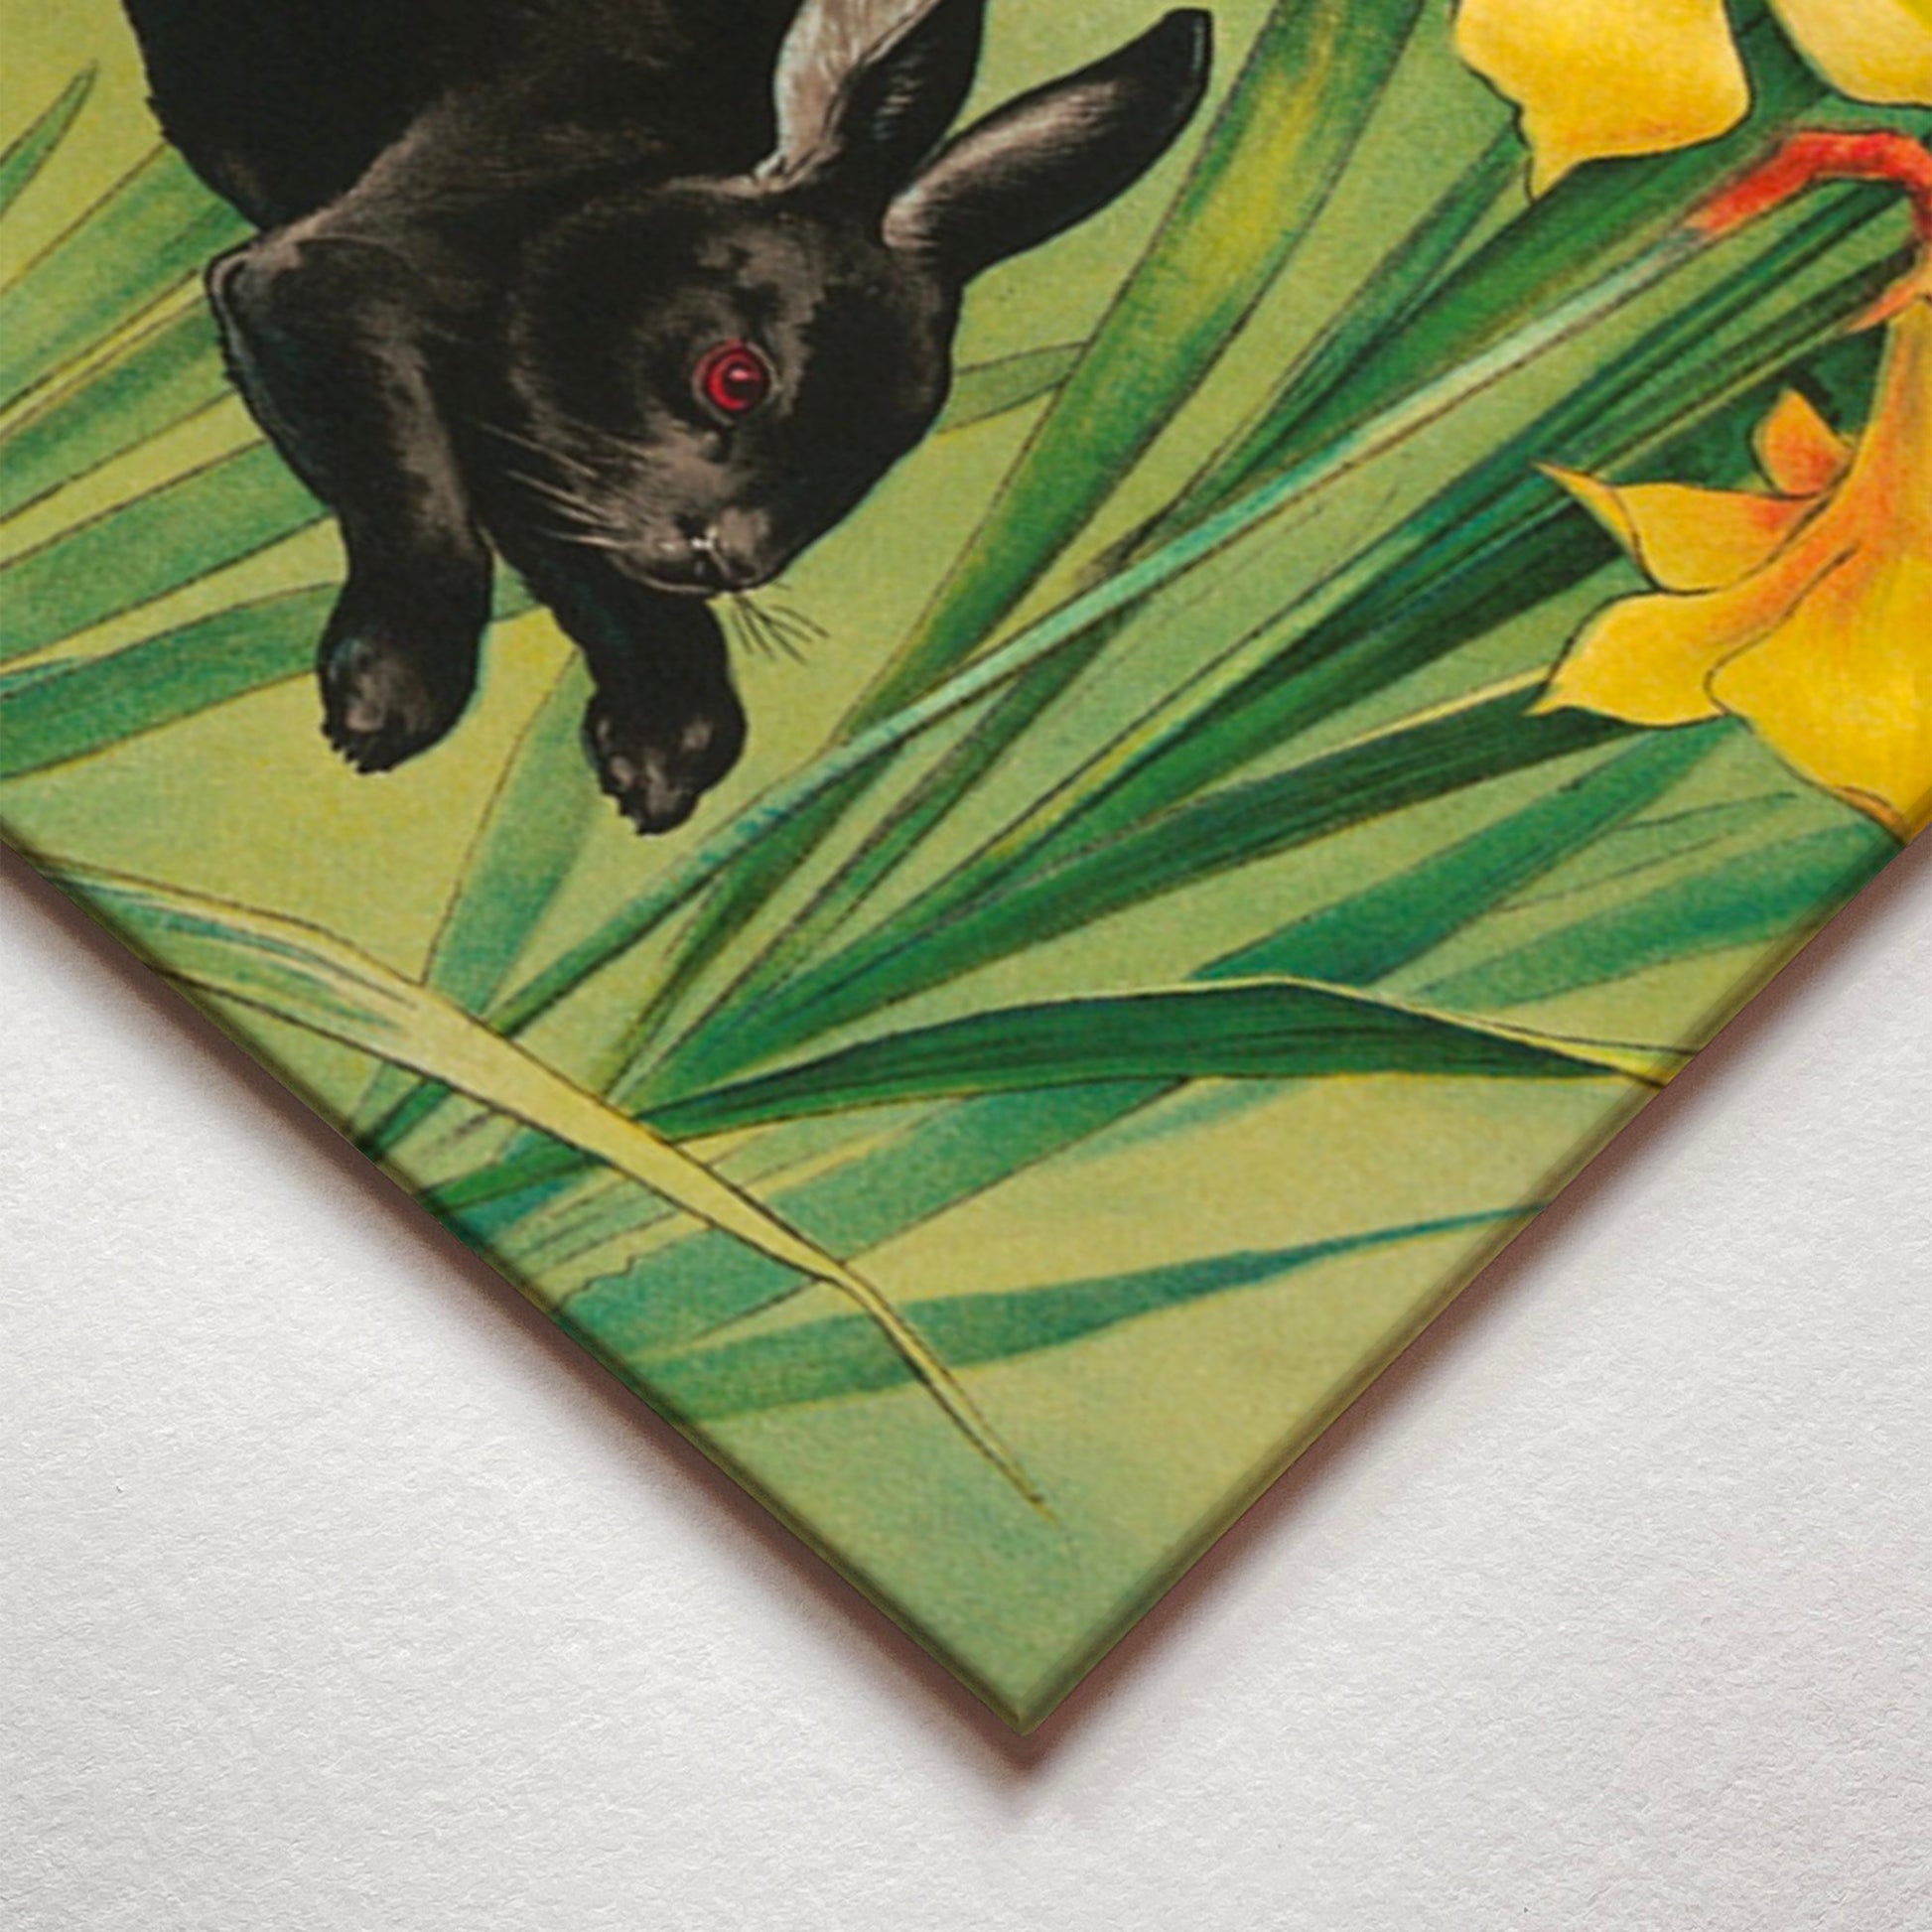 A closeup corner detail view of a metal art poster display plate with printed design of a Bunnies and Daffodils Vintage Illustration